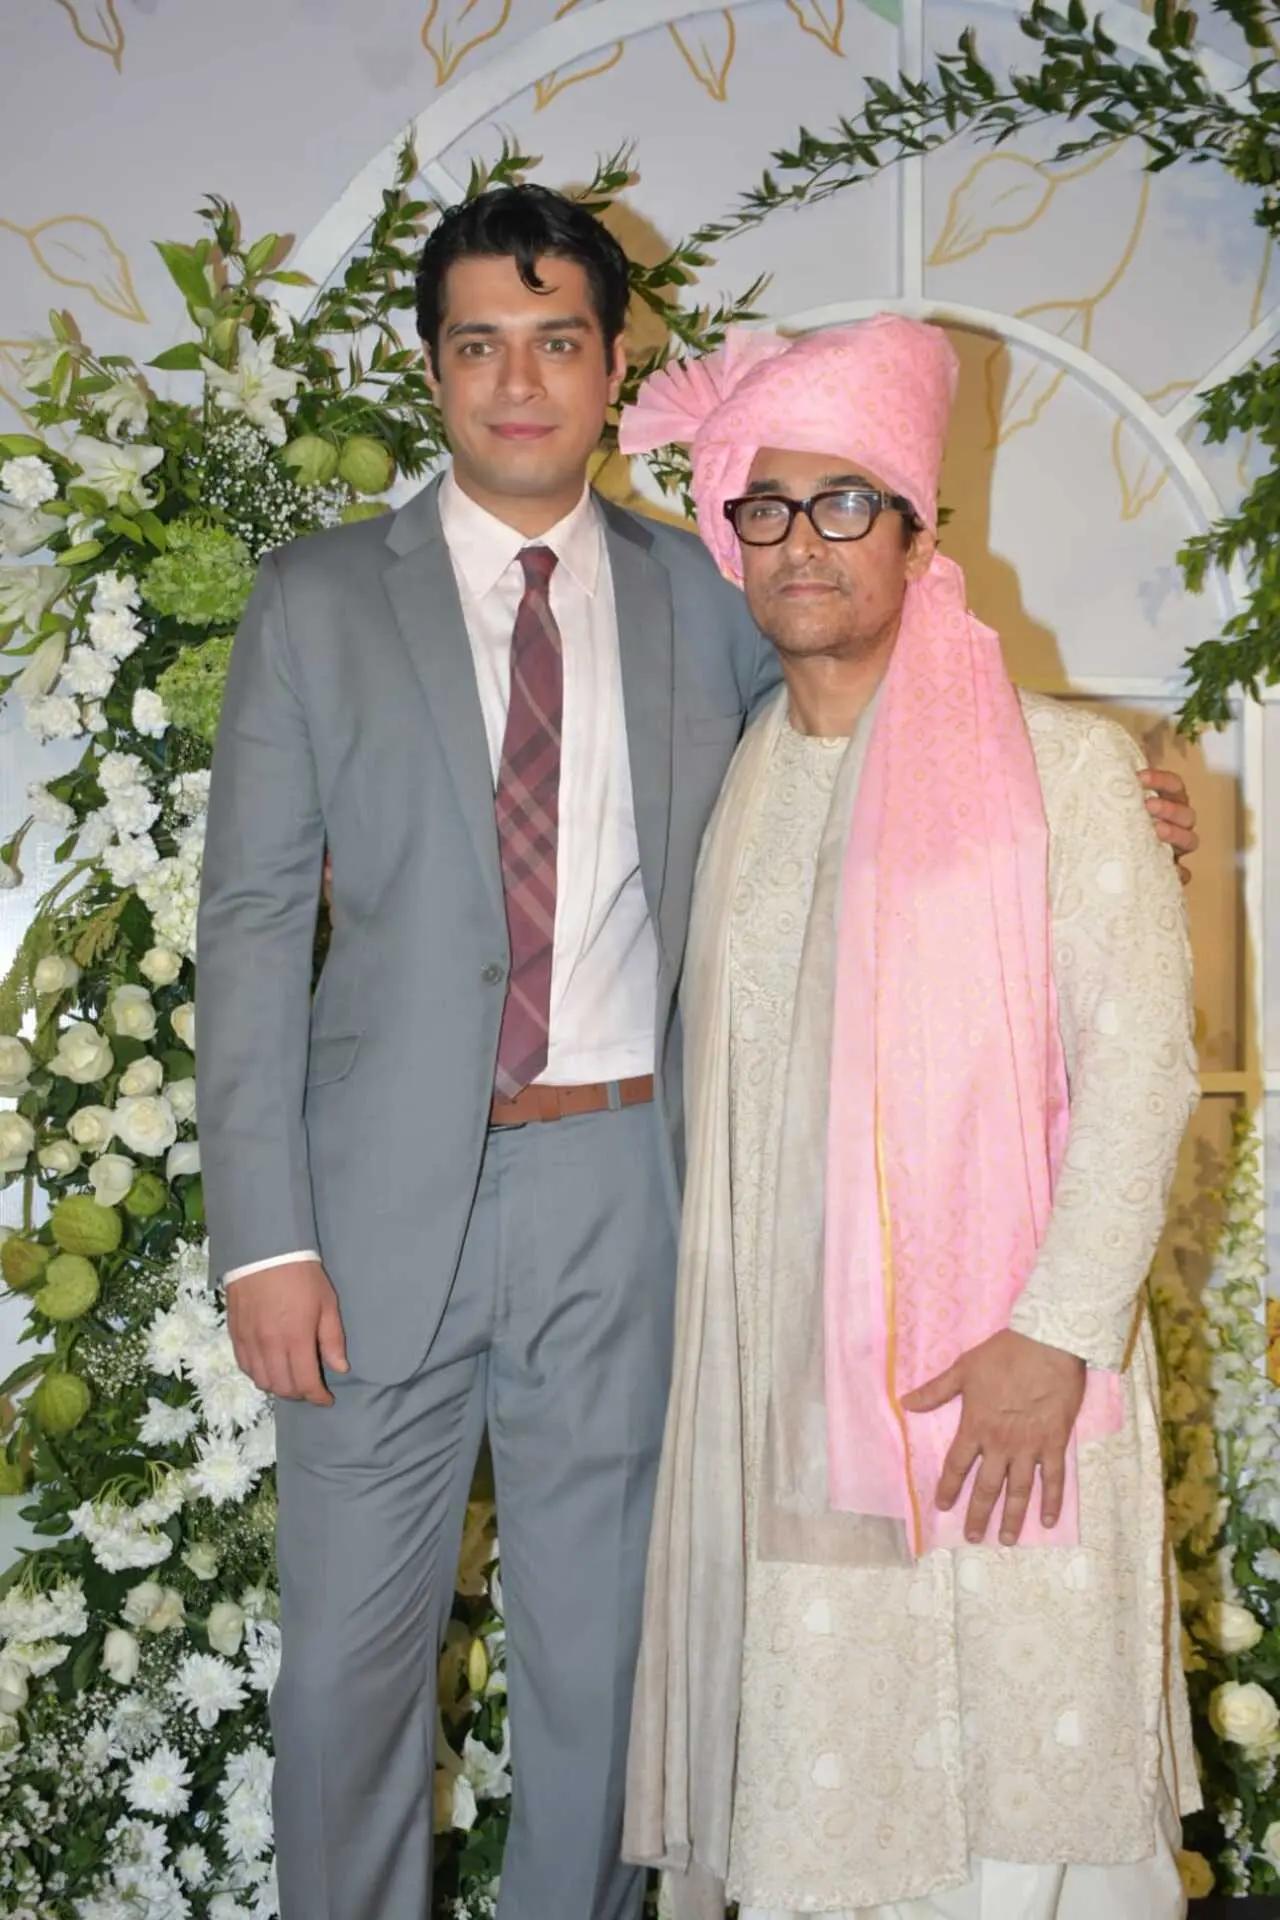 Aamir Khan's son Junaid Khan was photographed at the event. Many netizens started comparing him to Henry Cavill and soon he was nicknamed 'Indian Superman' (Pic/Yogen Shah)